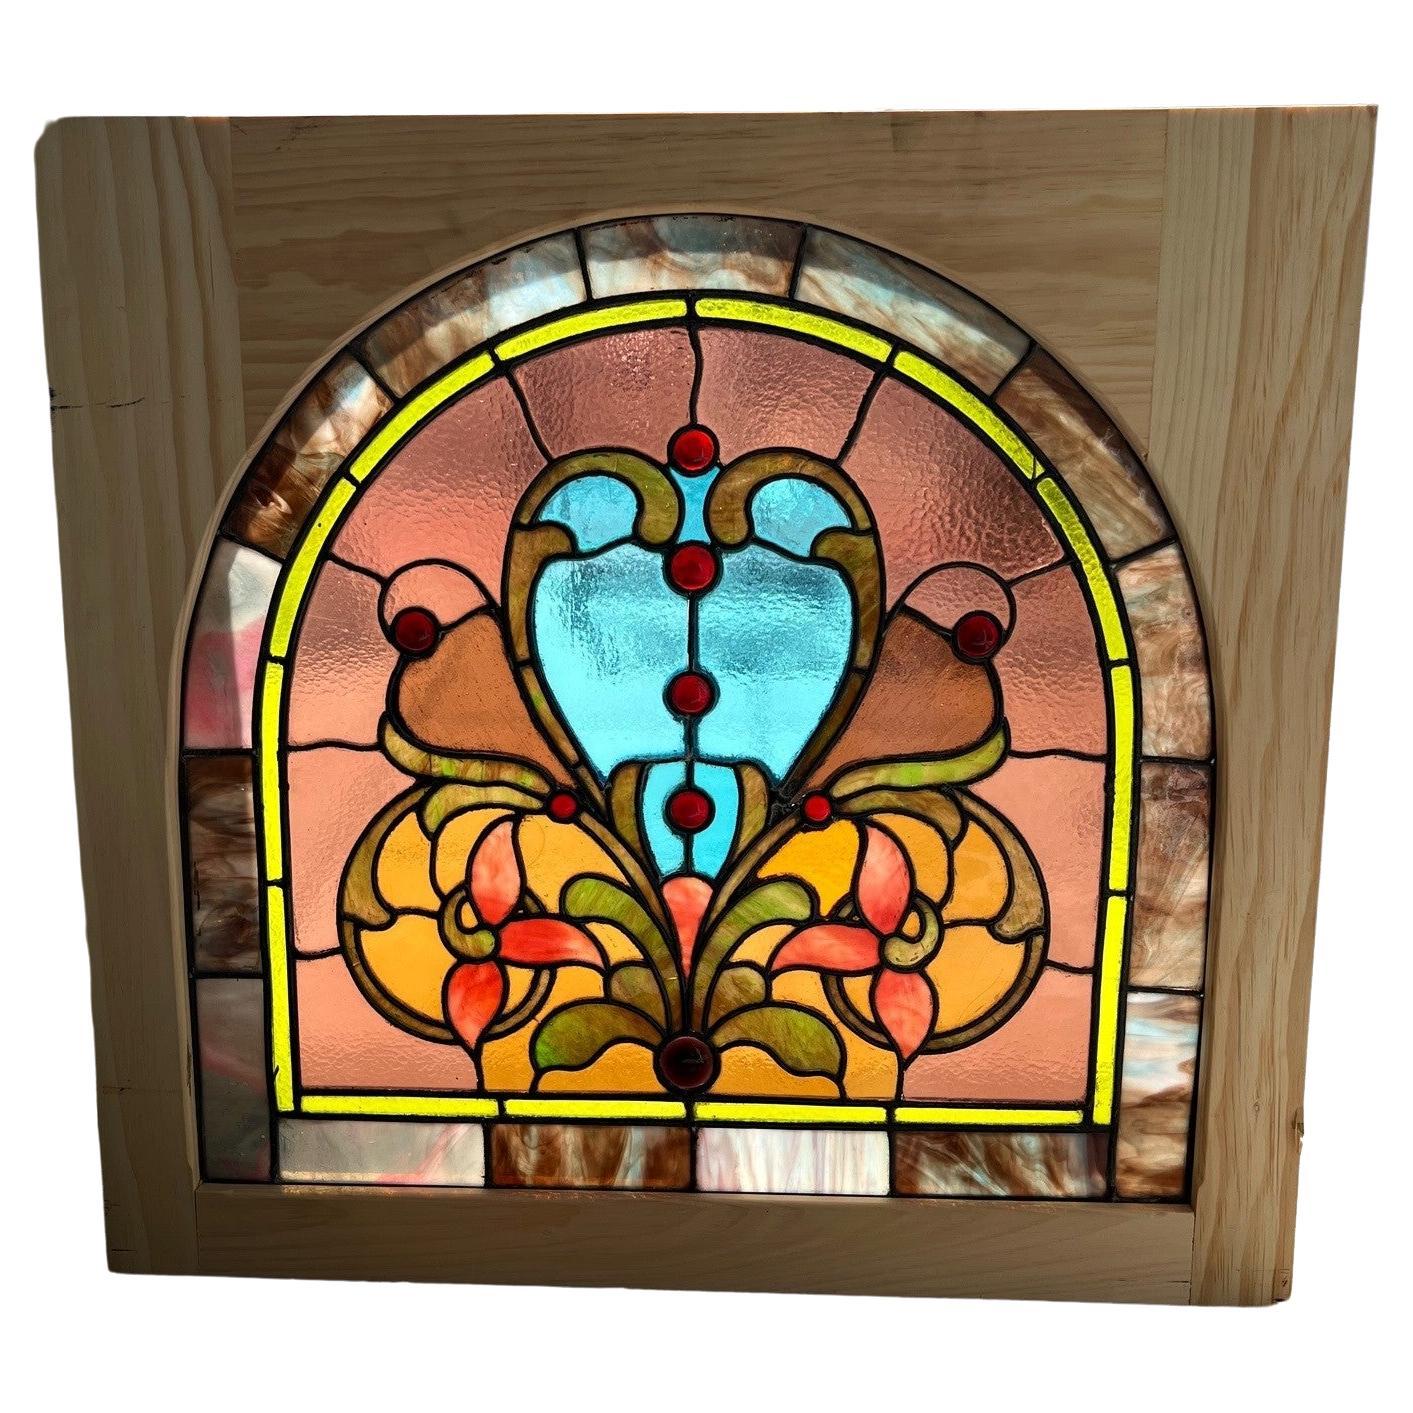 Late 19th Century Antique Arched Stained Glass Window in a New Wood Frame For Sale